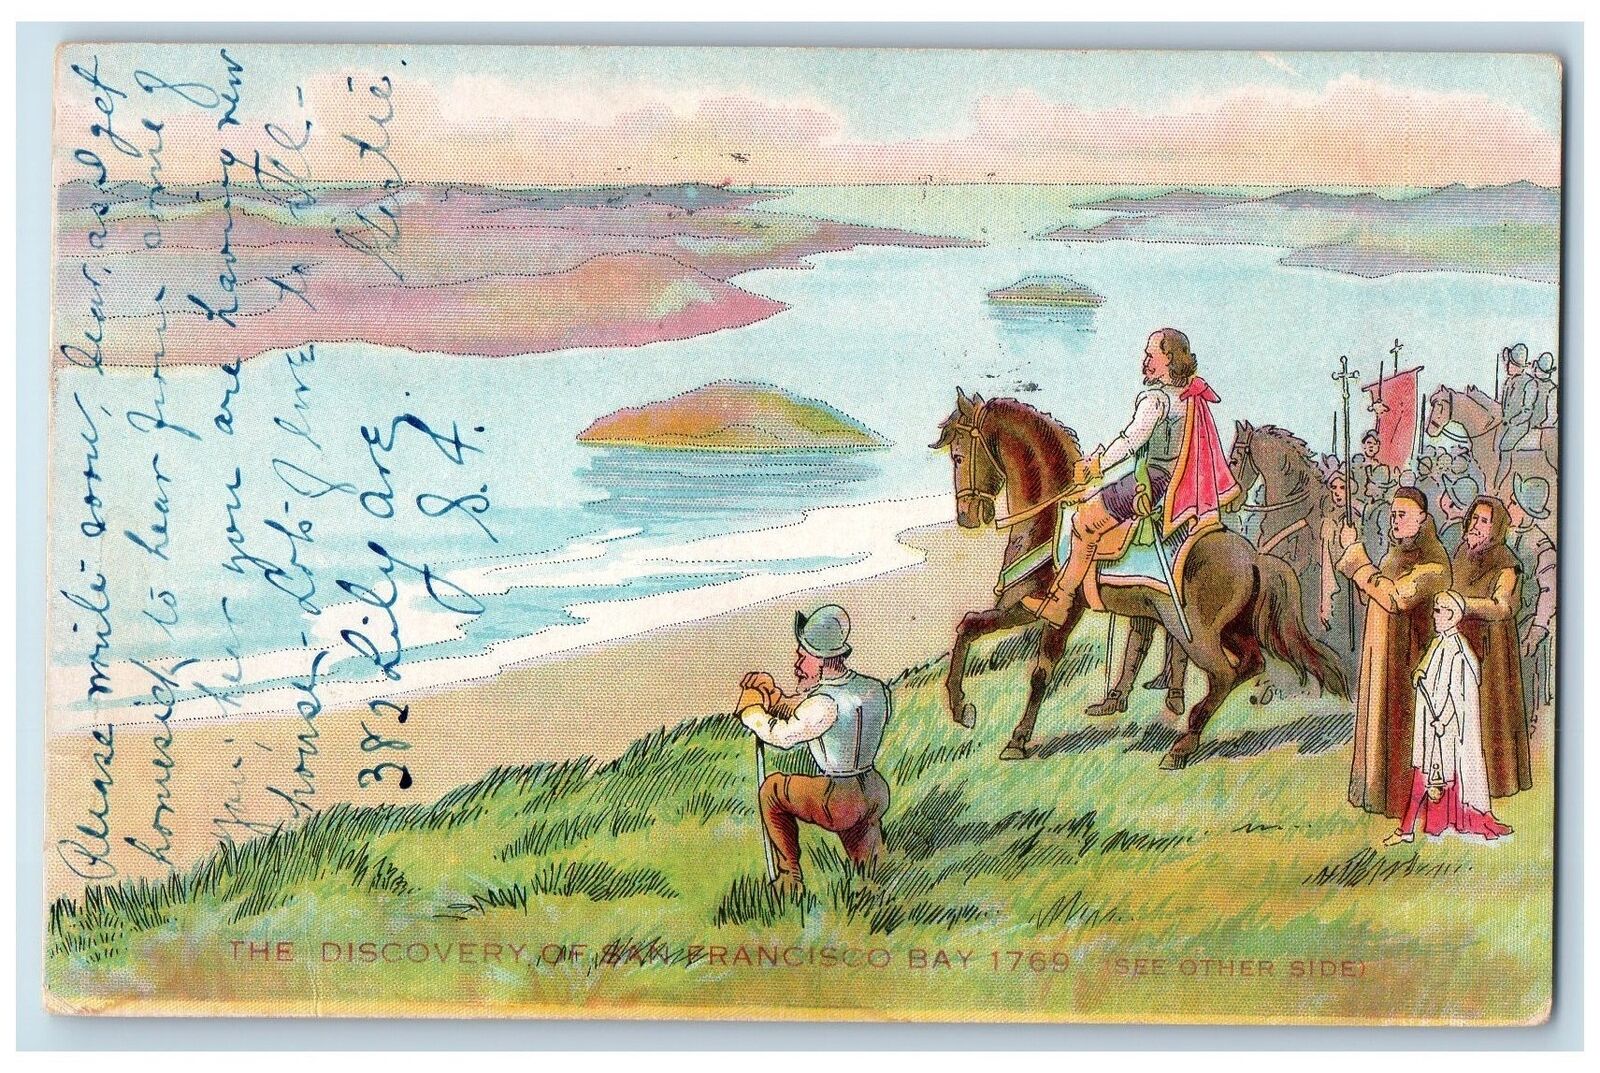 1909 The Discovery Of San Francisco Bay 1769 San Francisco CA Posted Postcard